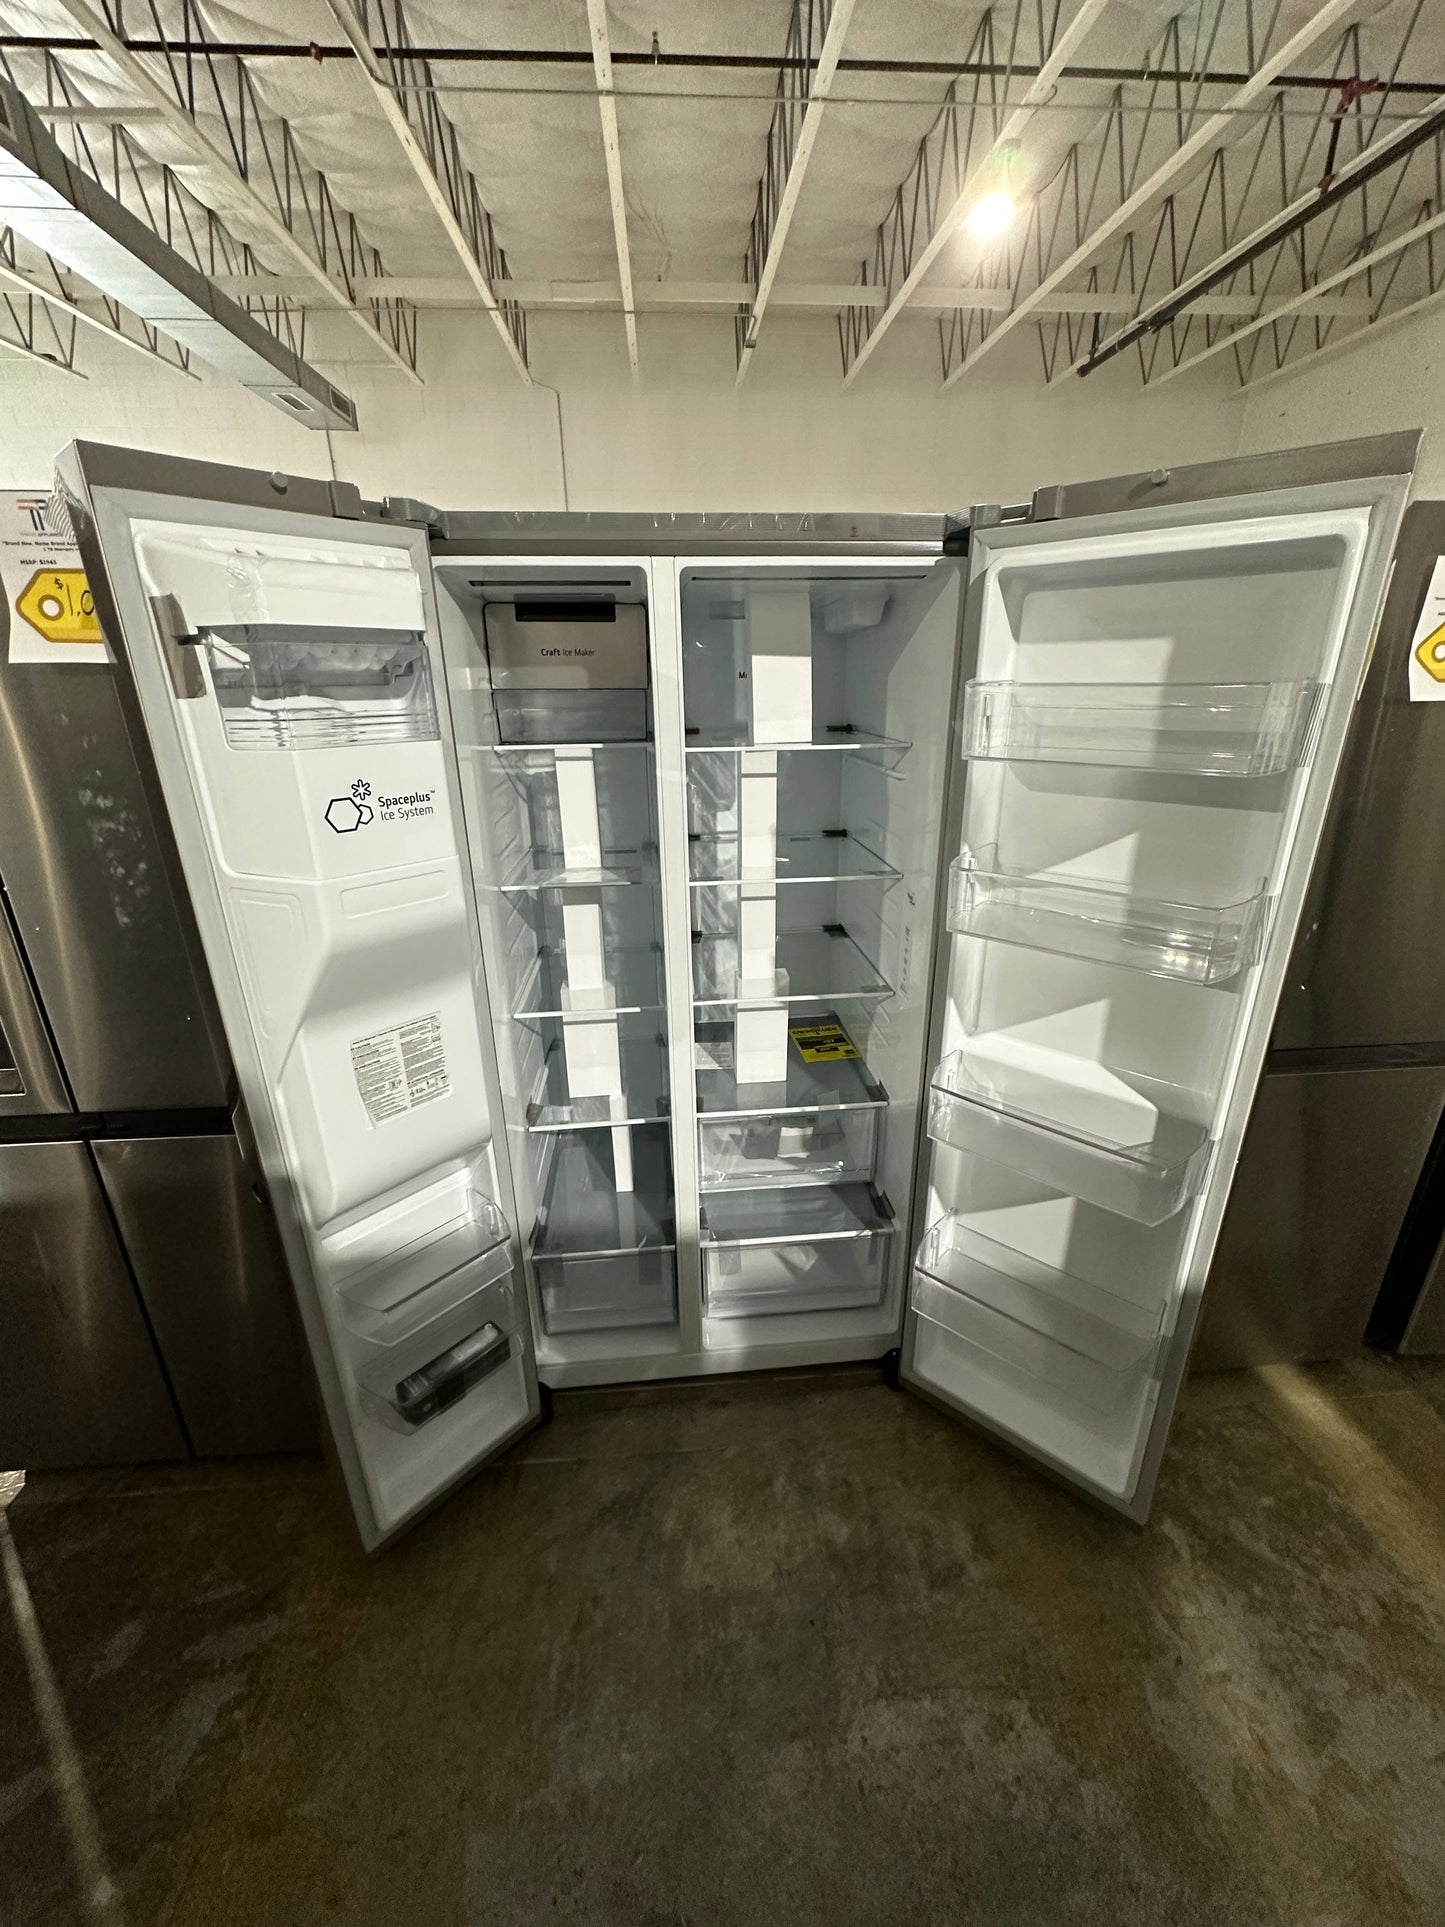 NEW LG SIDE-BY-SIDE REFRIGERATOR with SPACEPLUS ICE MODEL:LHSXS2706S  REF12253S